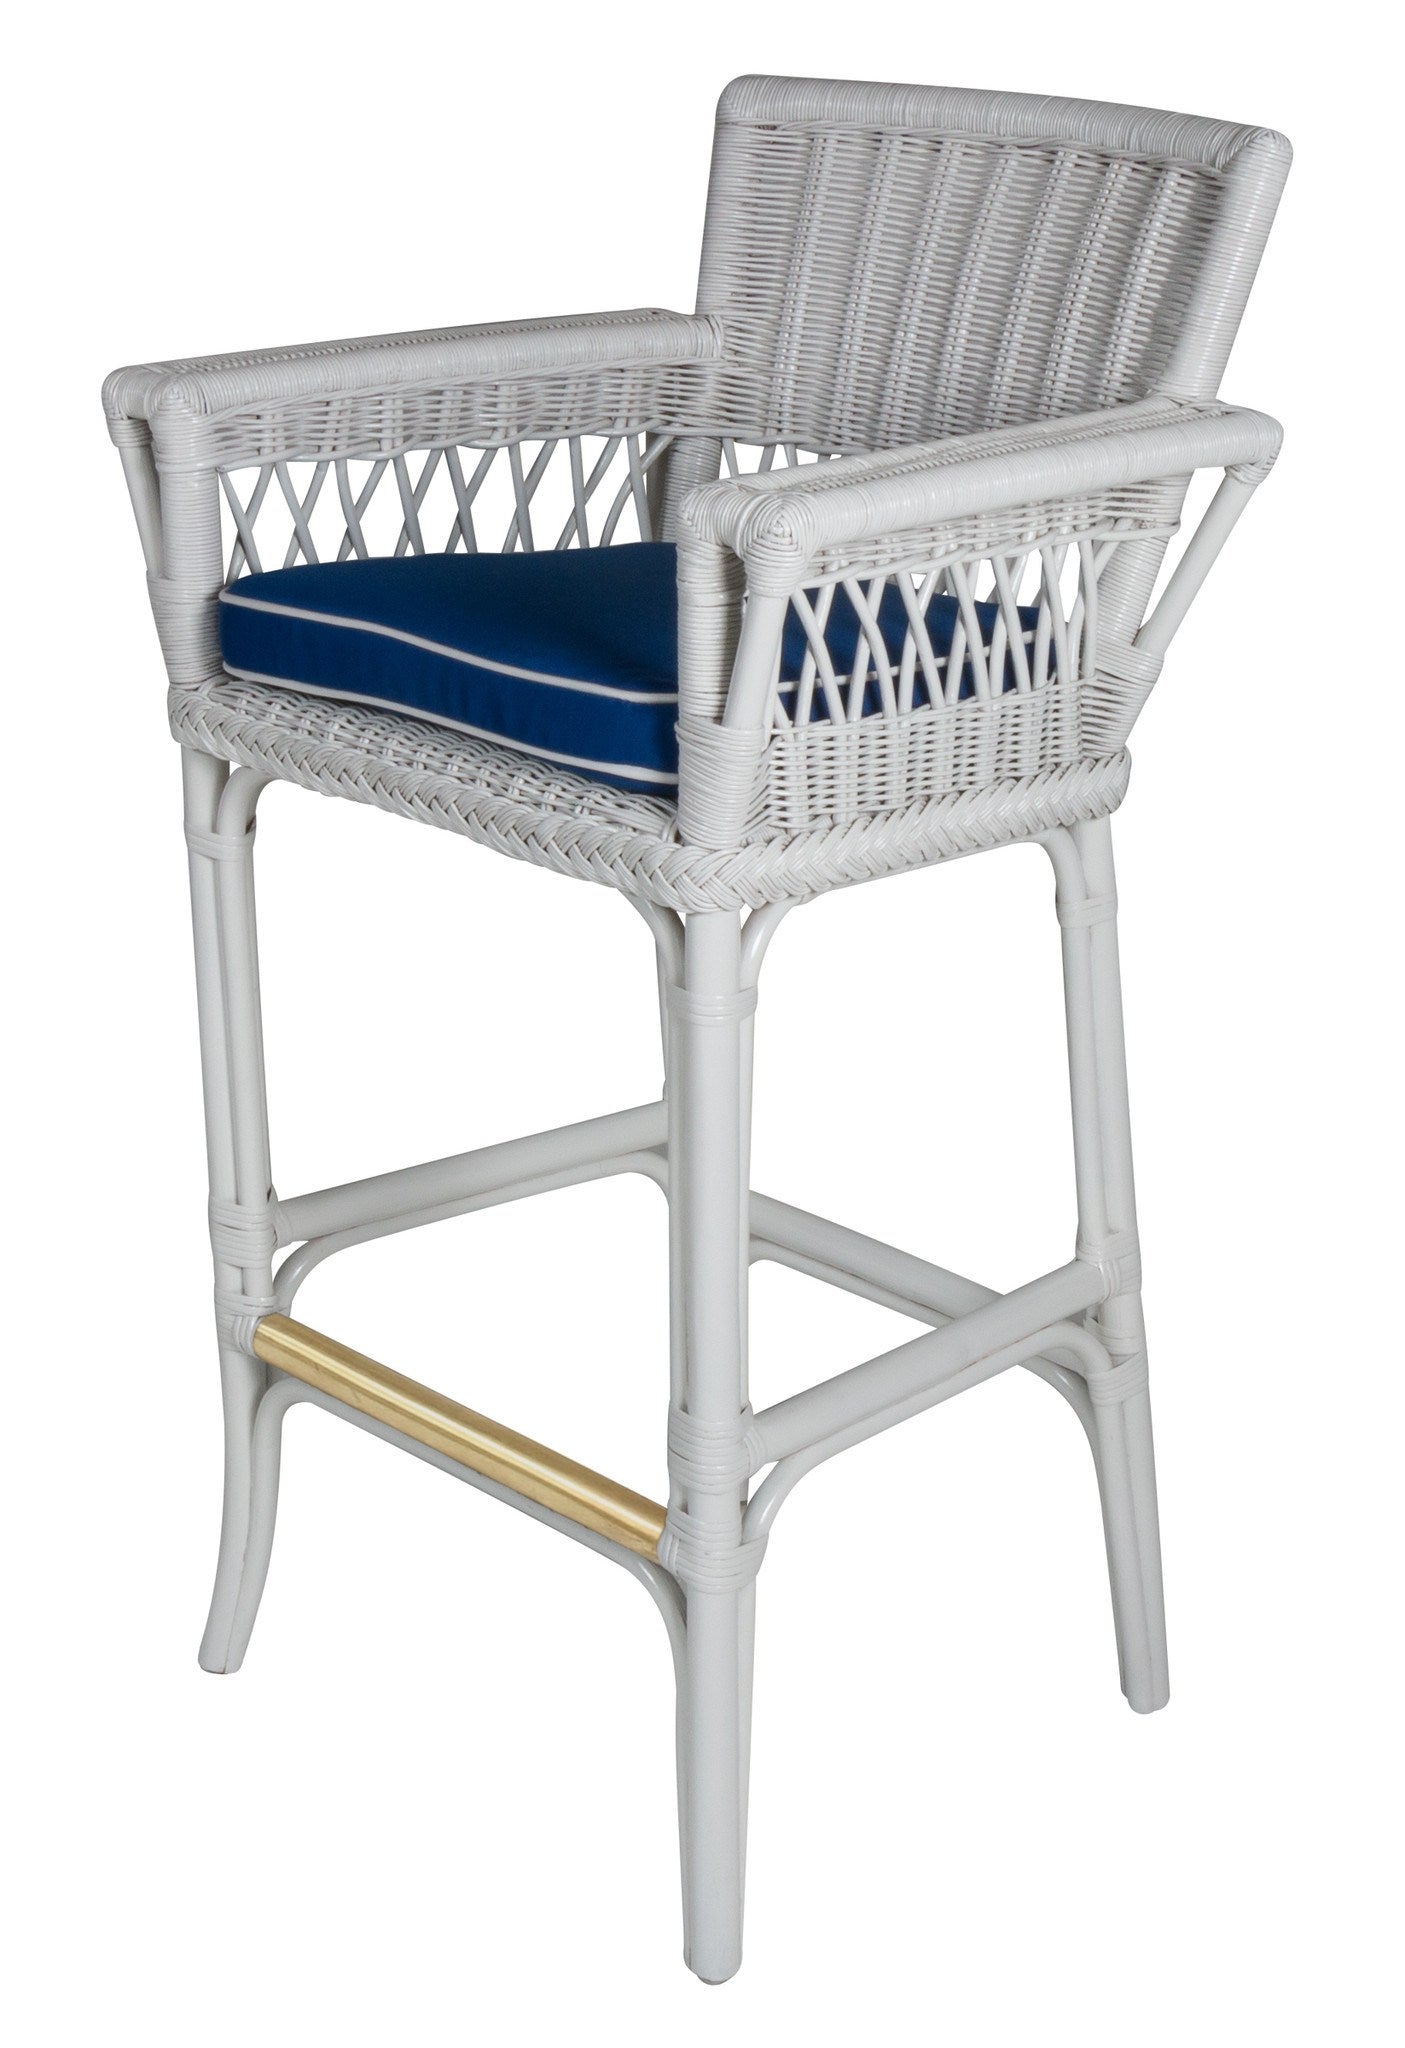 Designer Wicker & Rattan By Tribor Windsor Barstool With Arm by Design Wicker from Tribor Bar Stool - Rattan Imports